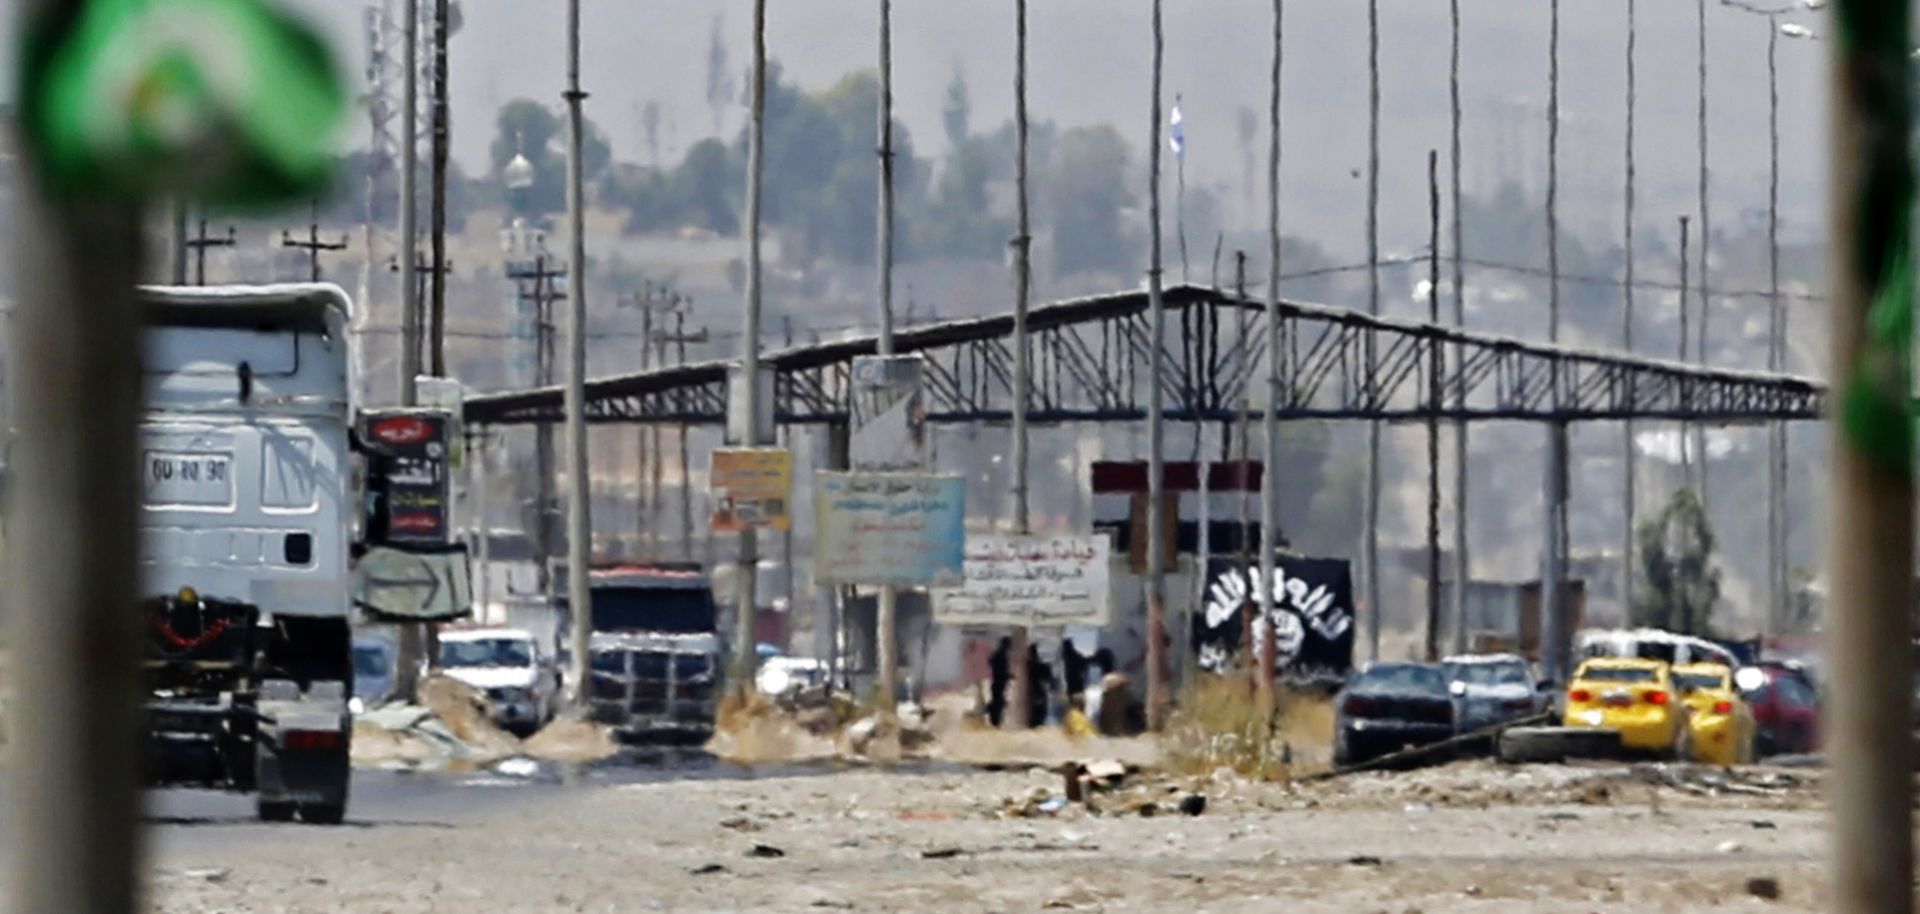 Islamic State militants hold a checkpoint in Mosul on June 16, 2014.